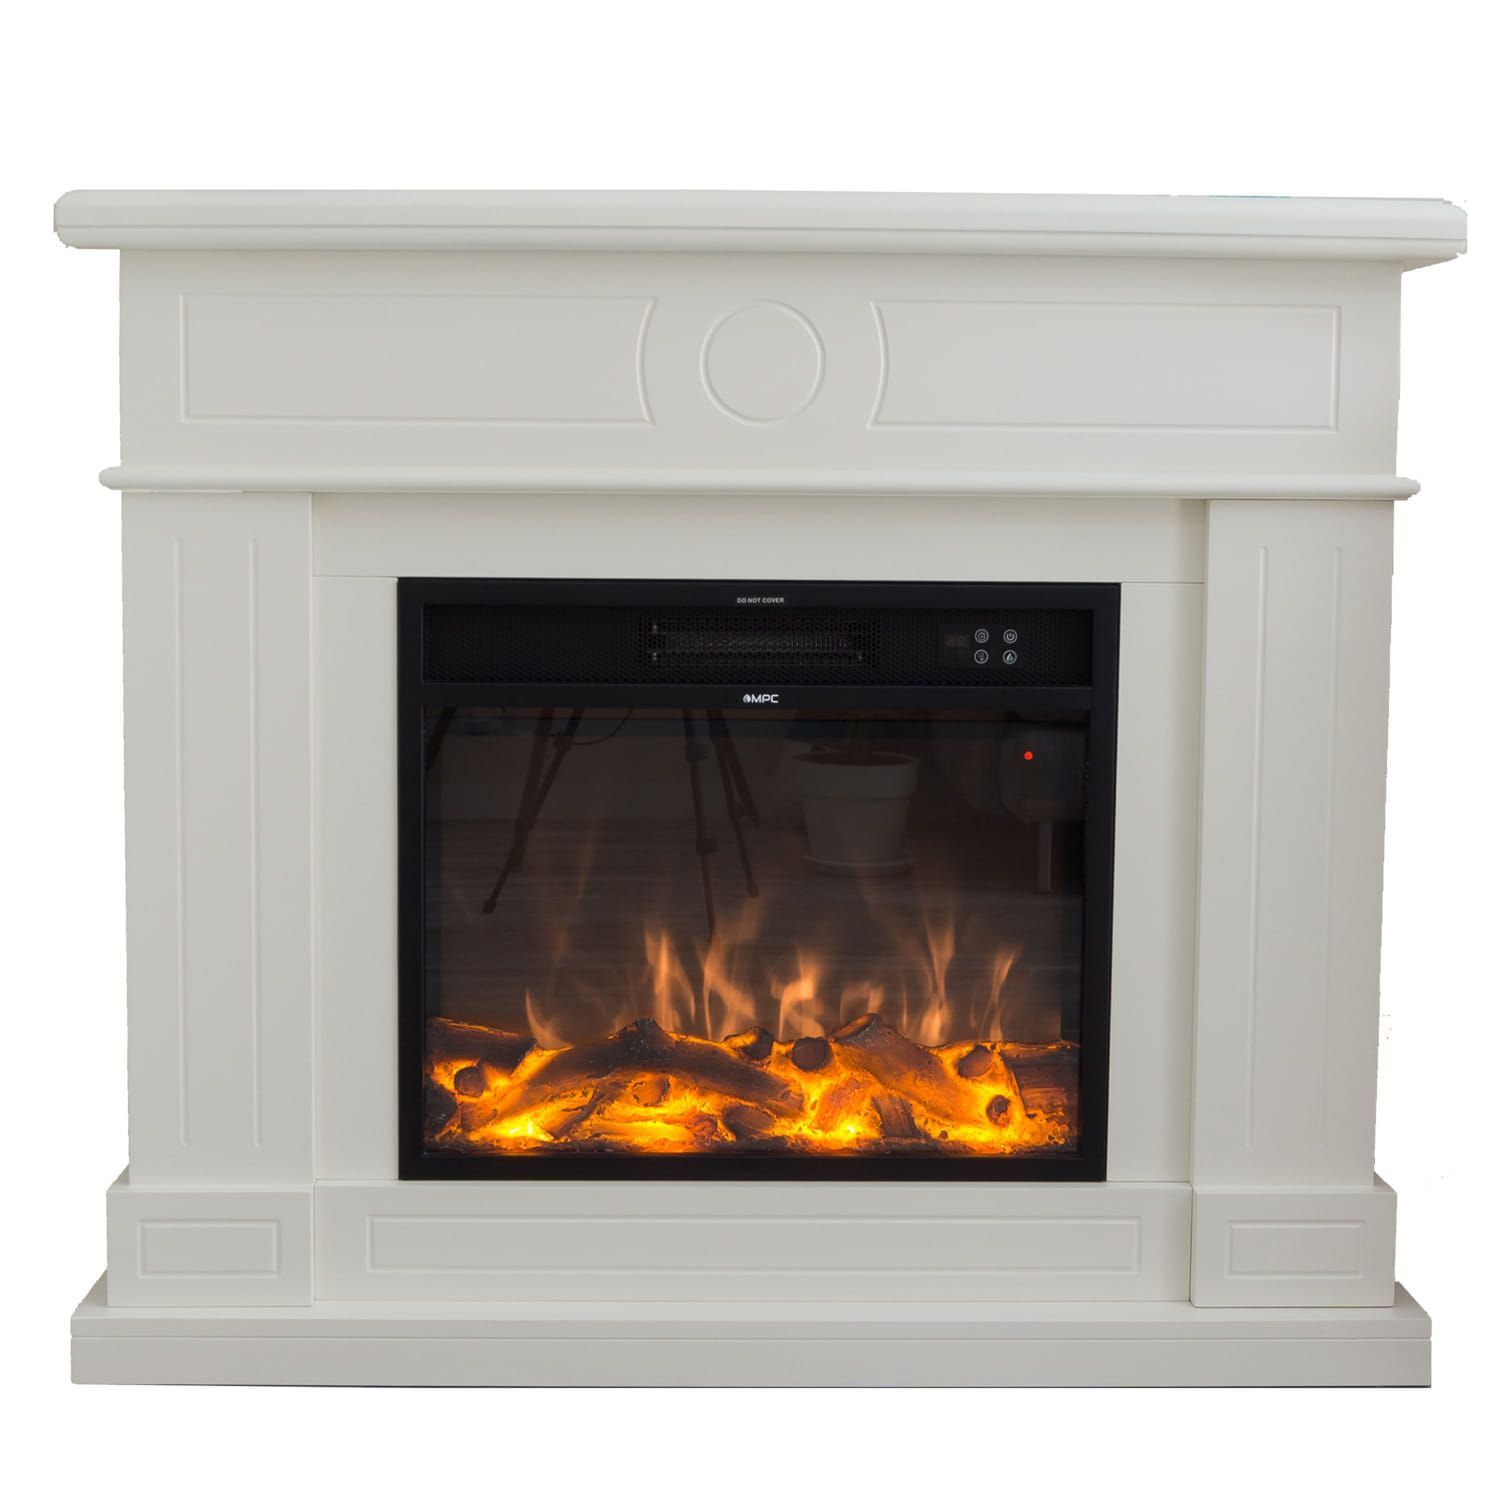 White fireplace for decorating